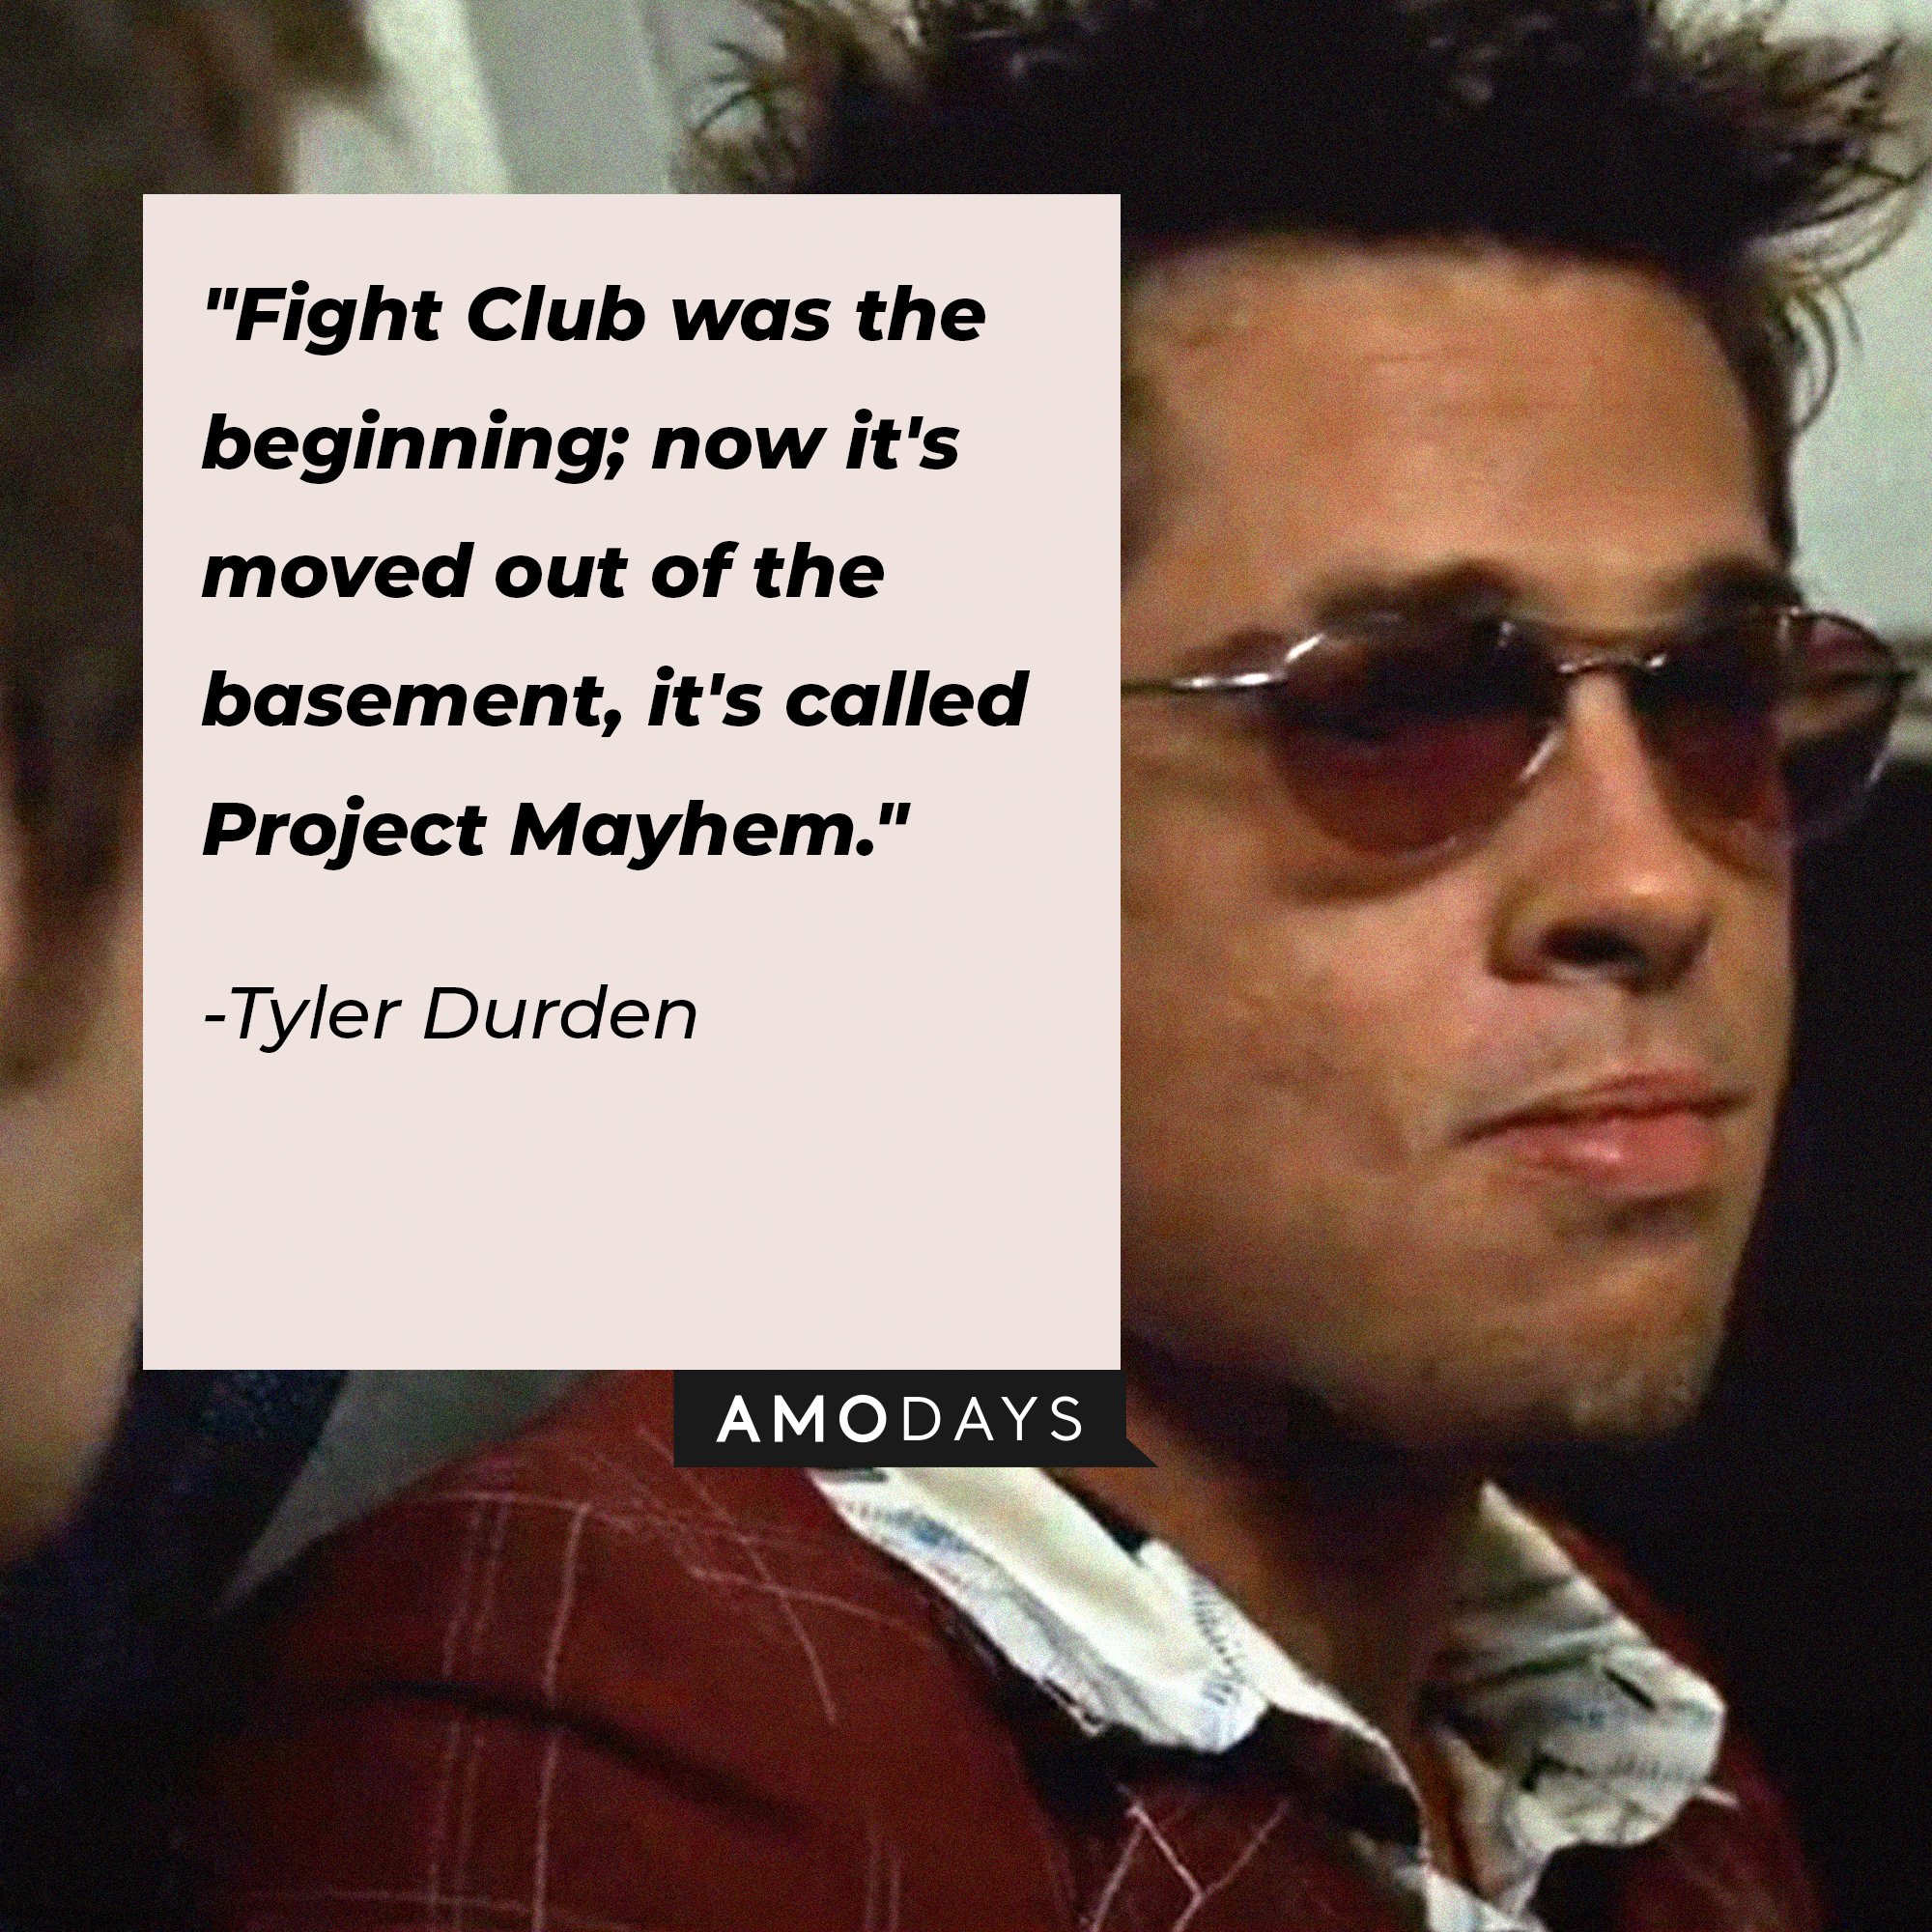 Tyler Durden's quote: "Fight Club was the beginning; now it's moved out of the basement, it's called Project Mayhem." | Image: AmoDays